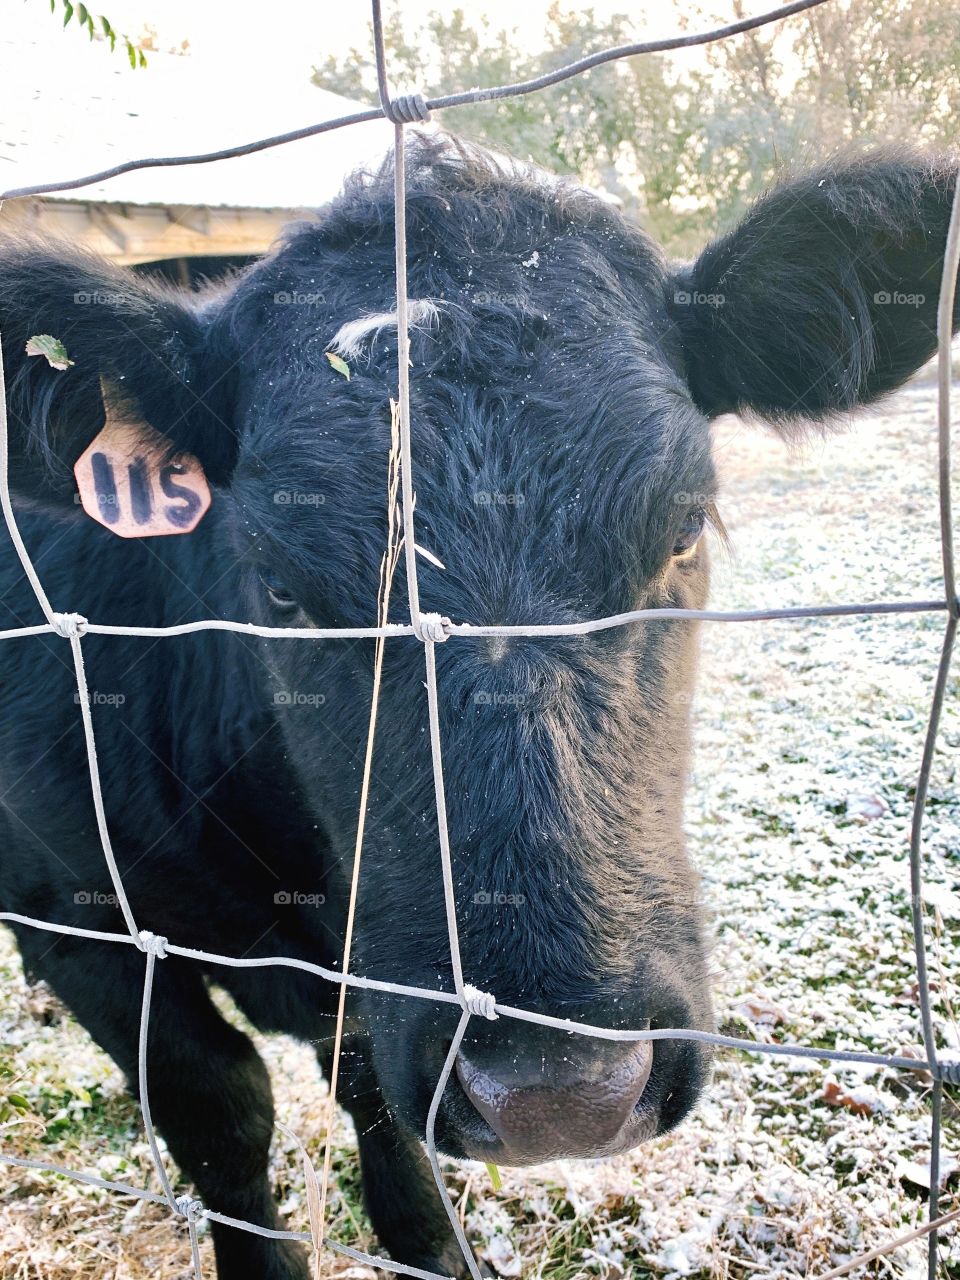 Eye-level view of a heifer with an ear tag and small white marking looking through a wire fence in a snow-covered cattle enclosure